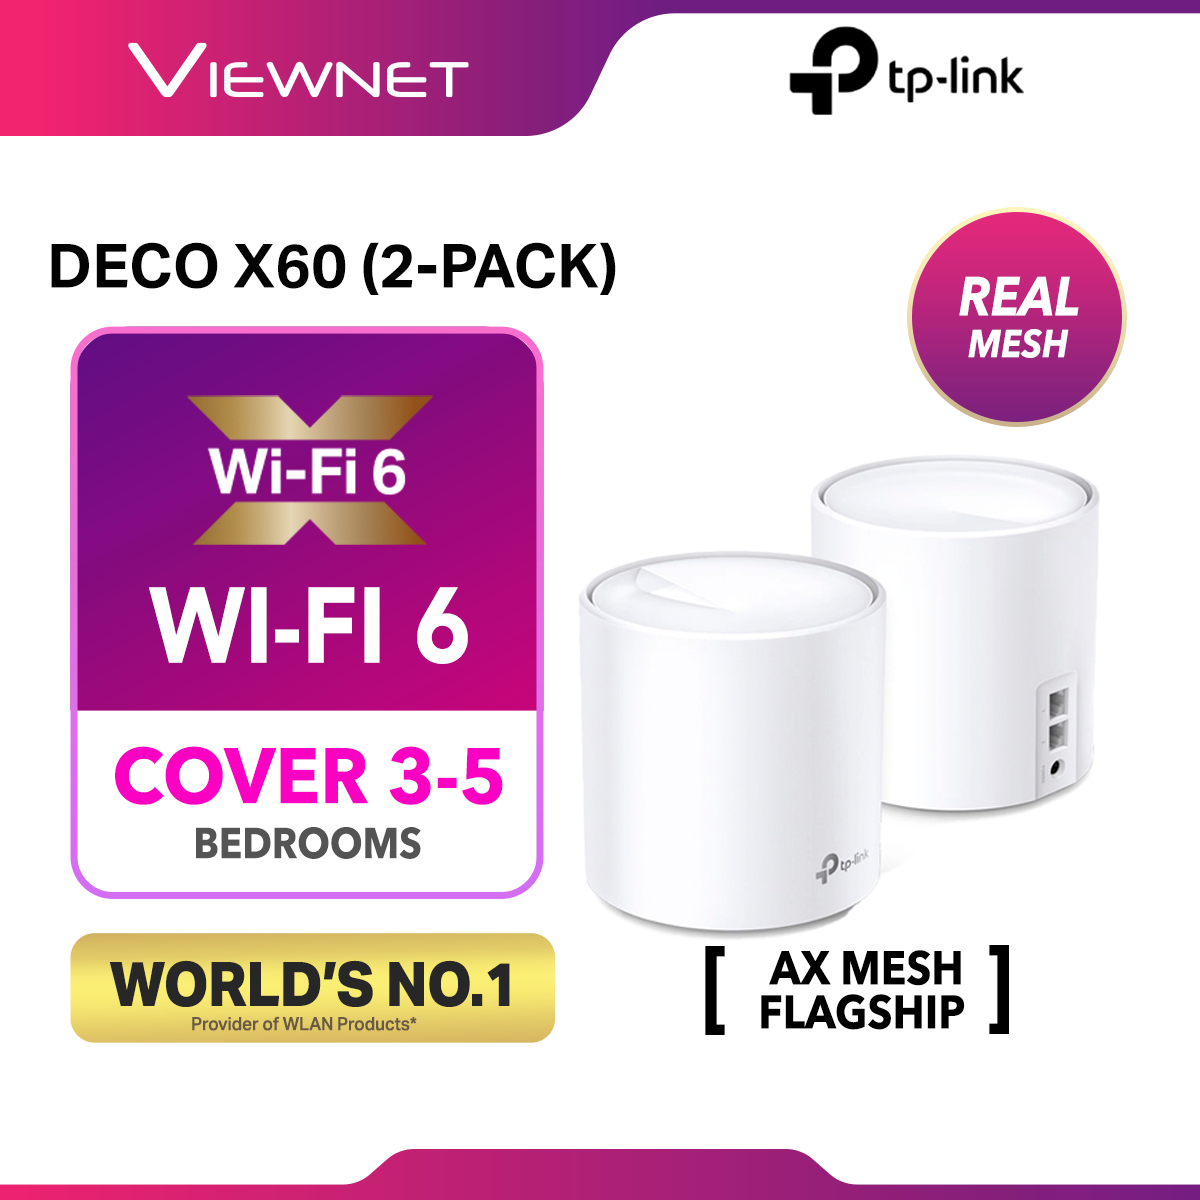 TP-Link Deco X60 (2 PACK) - AX3000 Wifi 6 Mesh Wifi Router Home Wireless System Support AP Mode or Router Mode